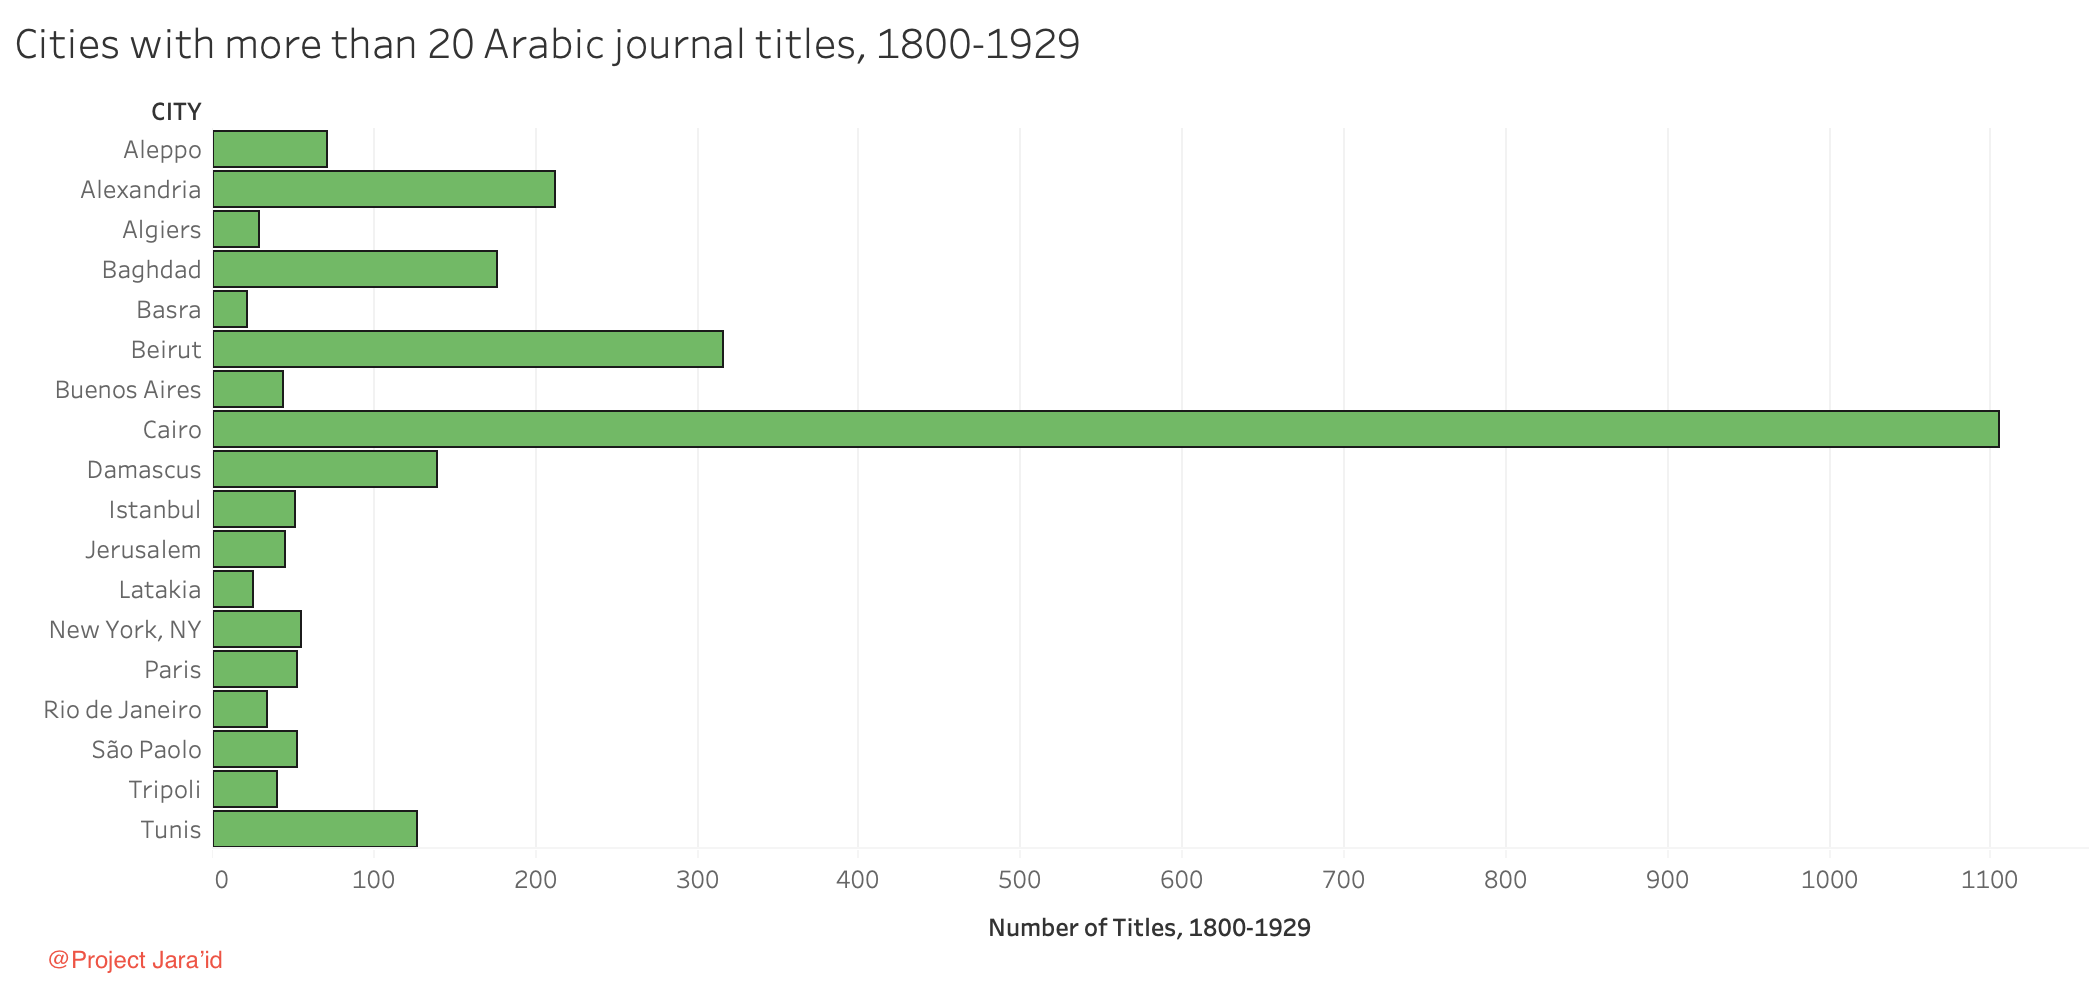 Cities with More Than 20 Arabic Journal Titles, 1800-1929